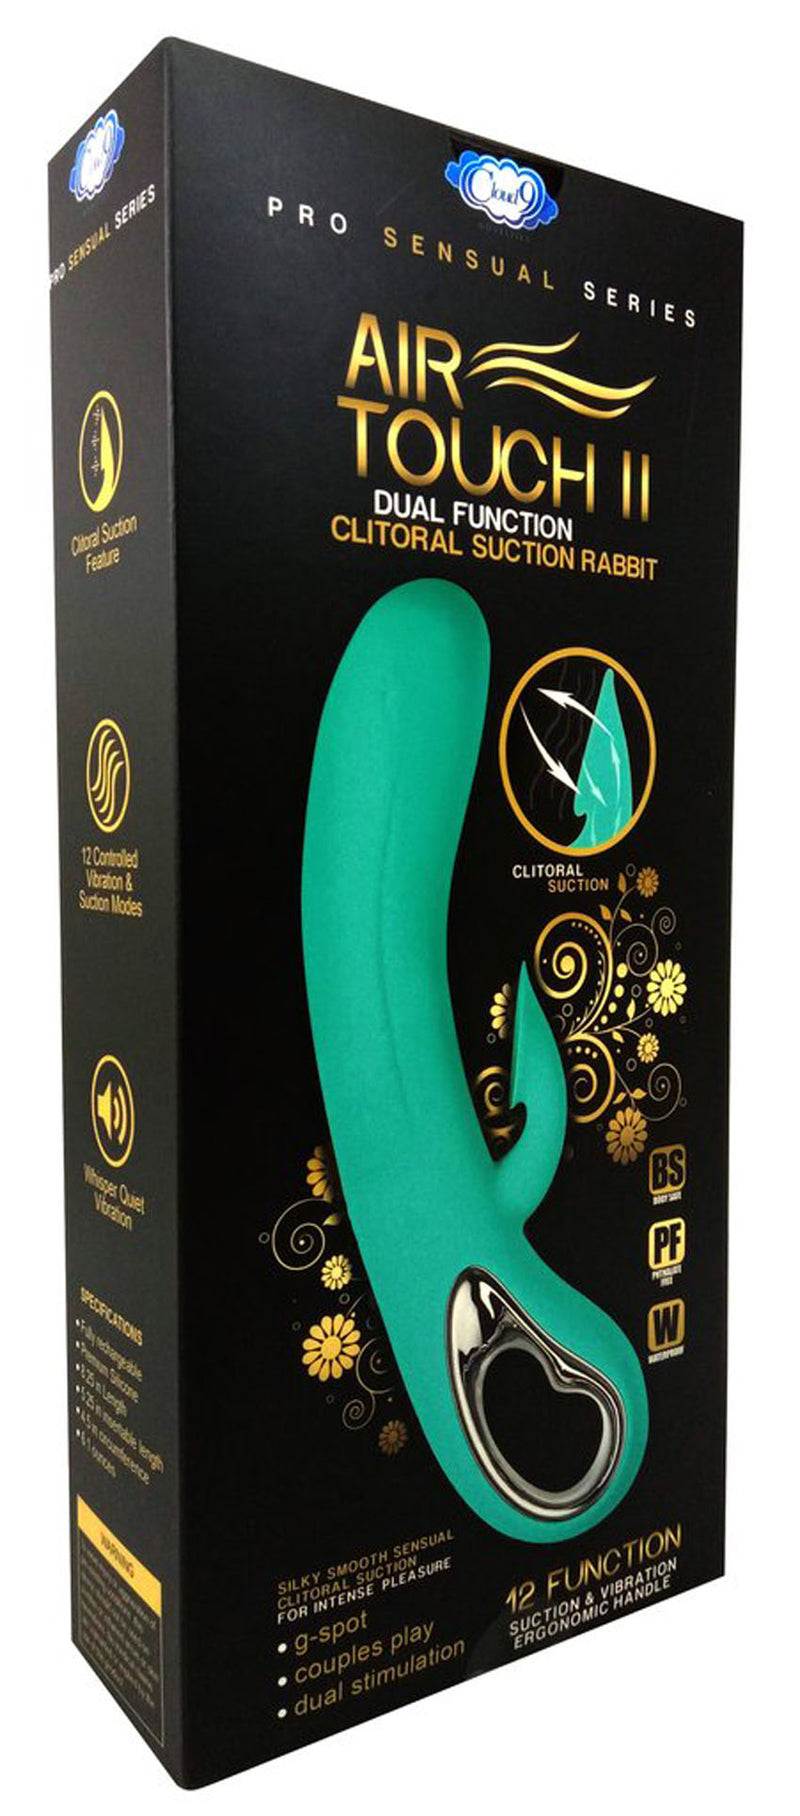 Experience Ultimate Pleasure with the Air Touch II Clitoral Suction Vibrator